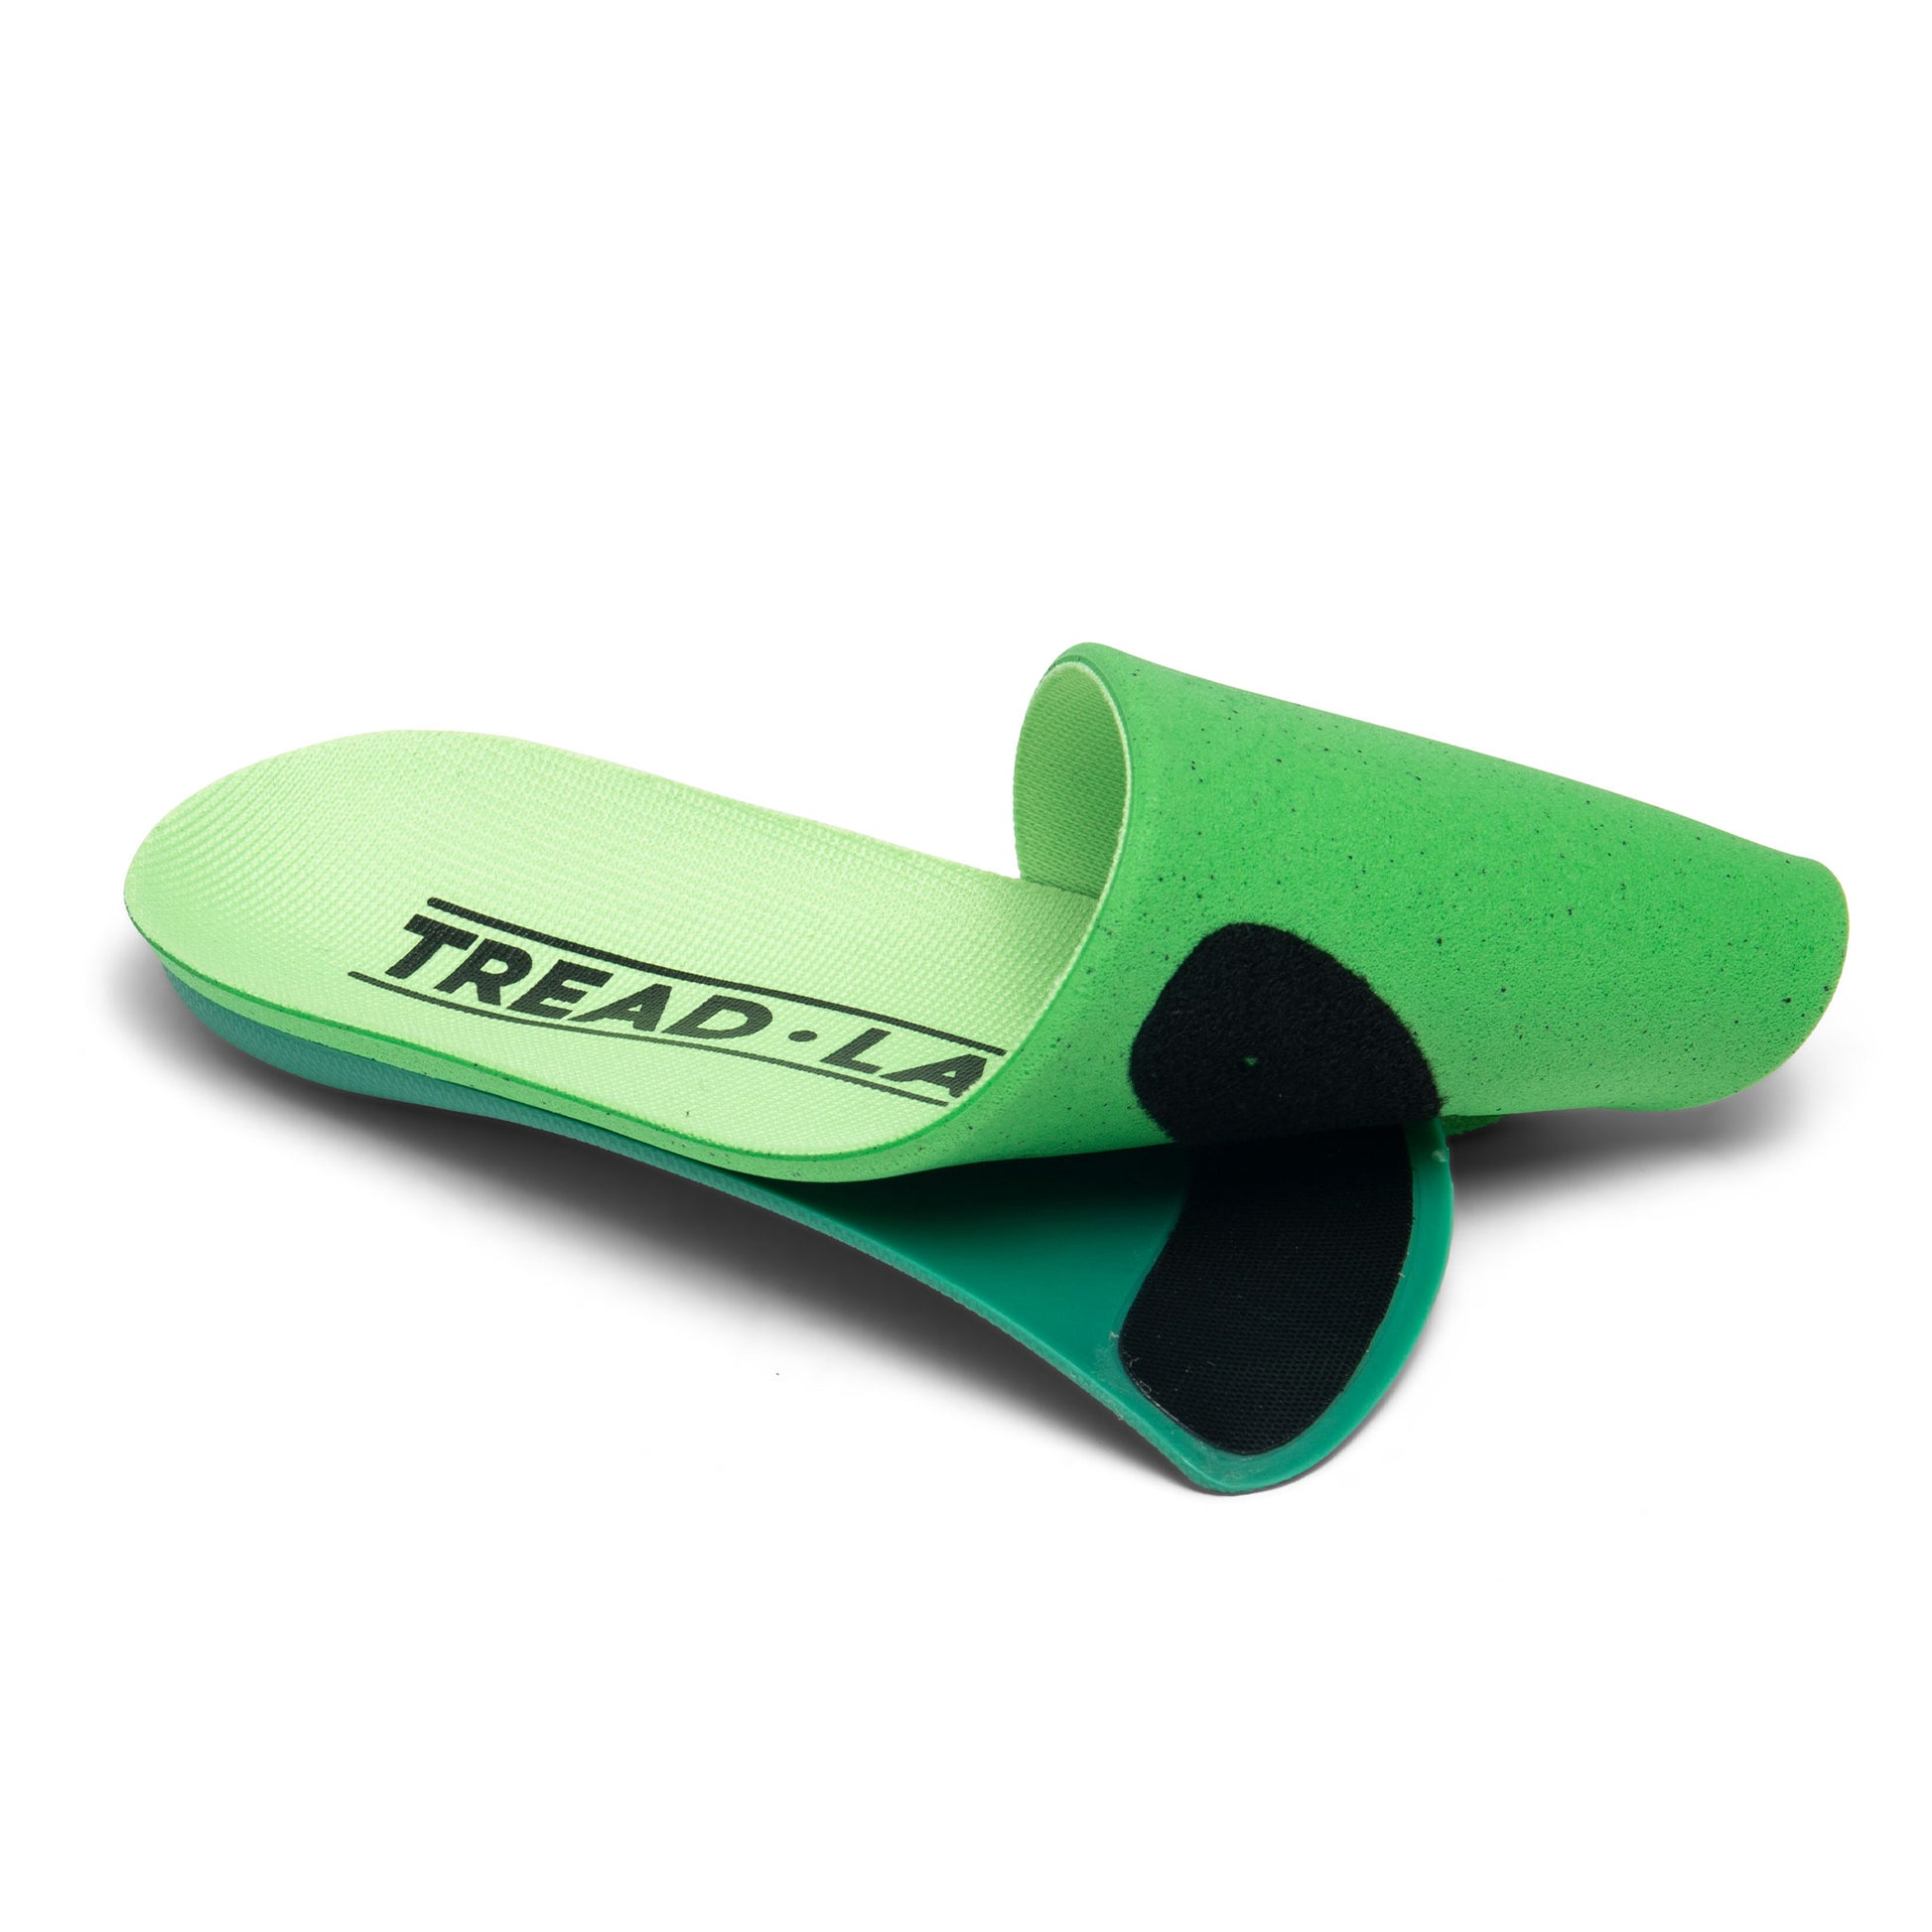 Tread Labs Ramble Insole Two Part System - Arch Support and Top Cover